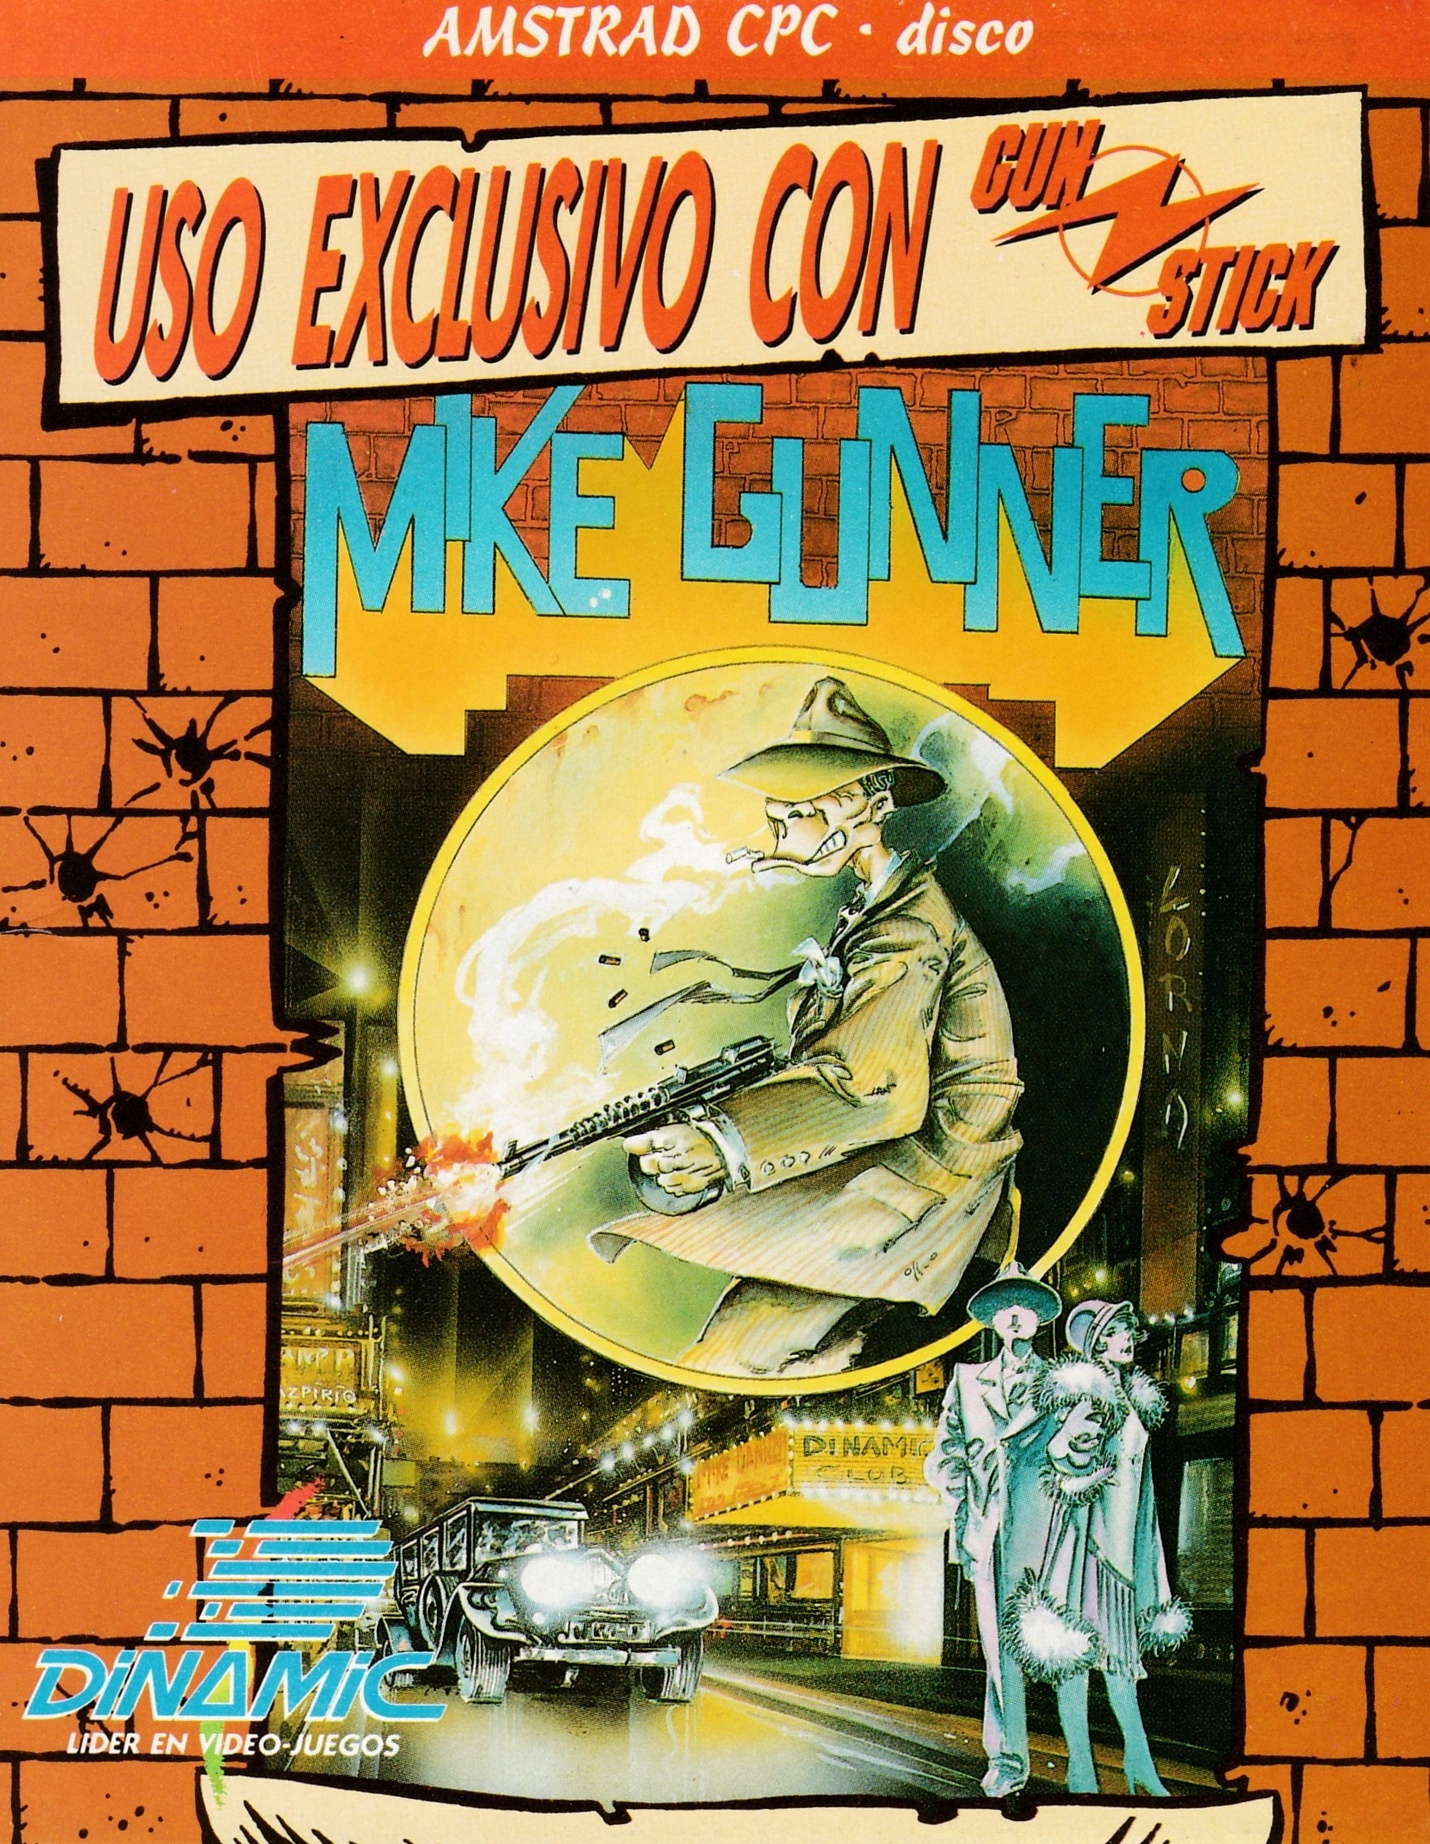 cover of the Amstrad CPC game Mike Gunner  by GameBase CPC